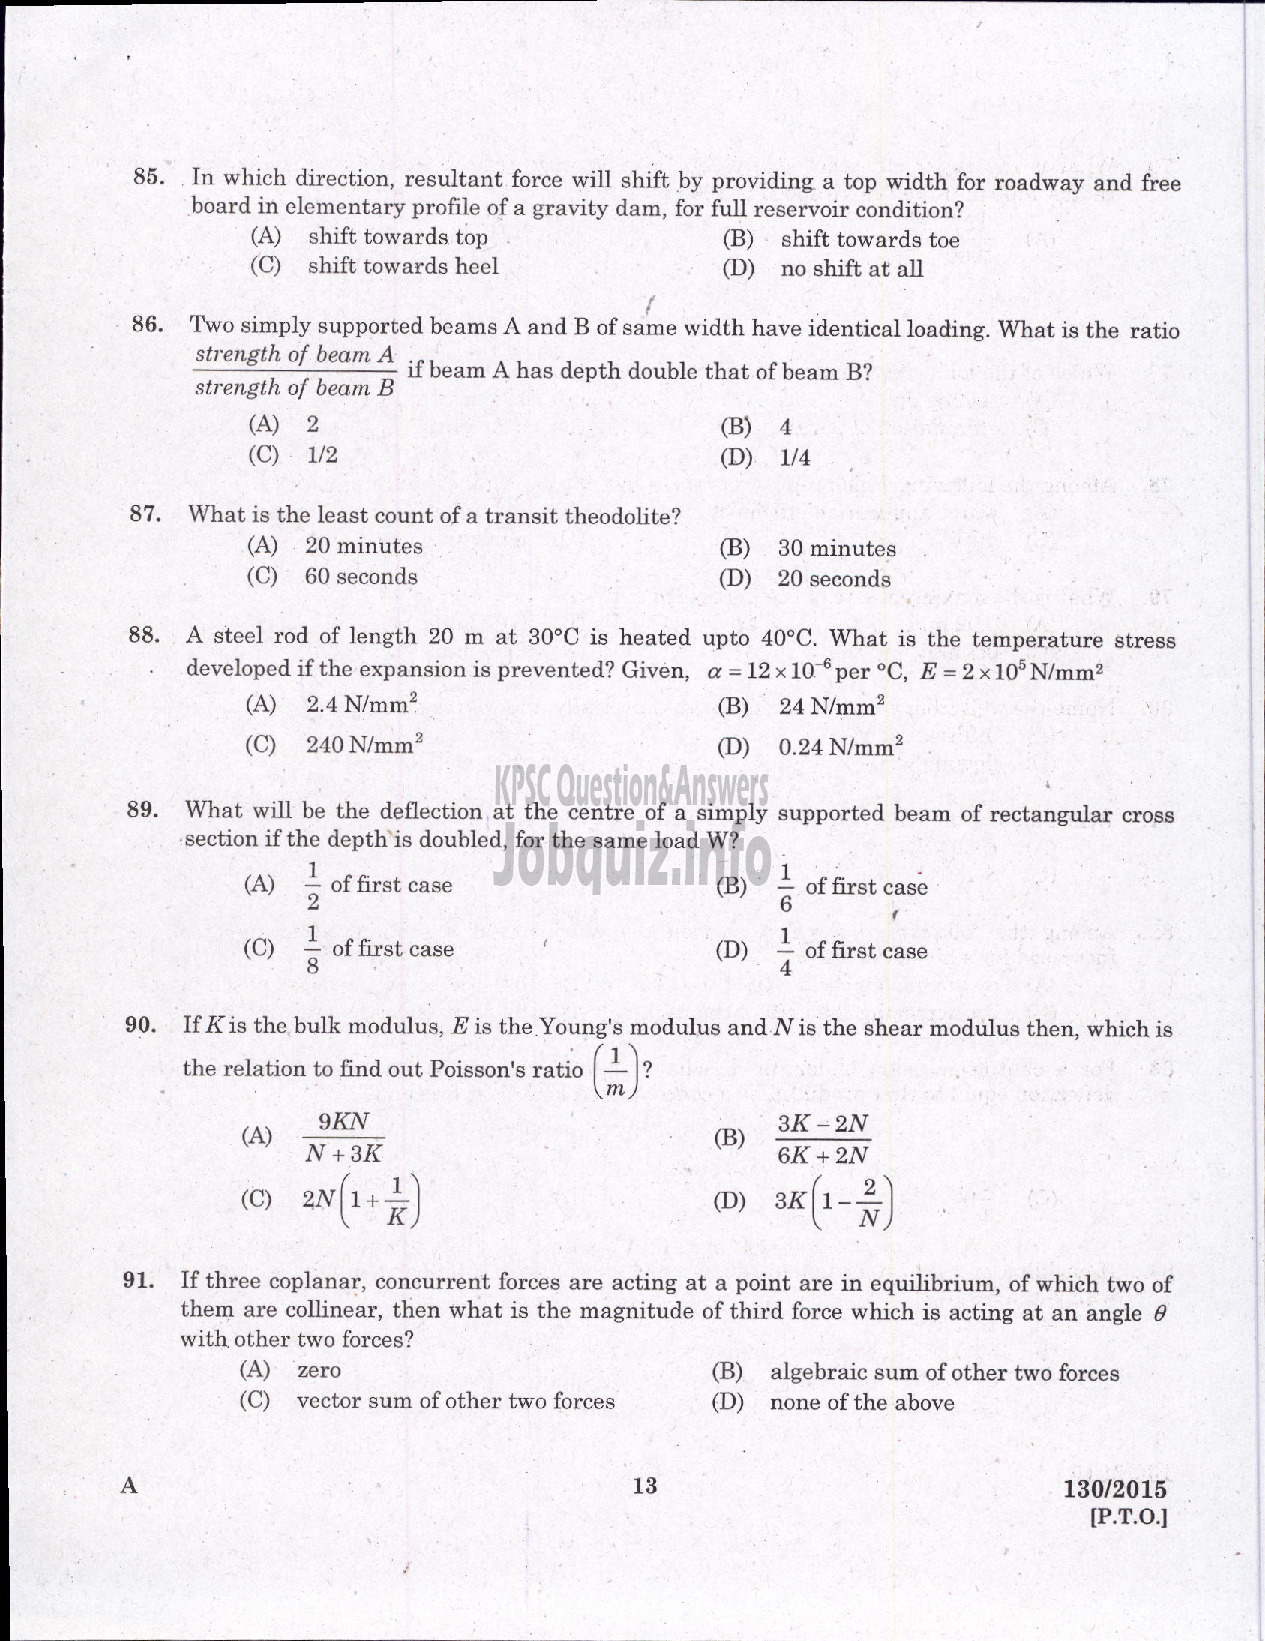 Kerala PSC Question Paper - ASSISTANT ENGINEER CIVIL LOCAL SELF GOVERNMENT/PWD/IRRIGATION-11